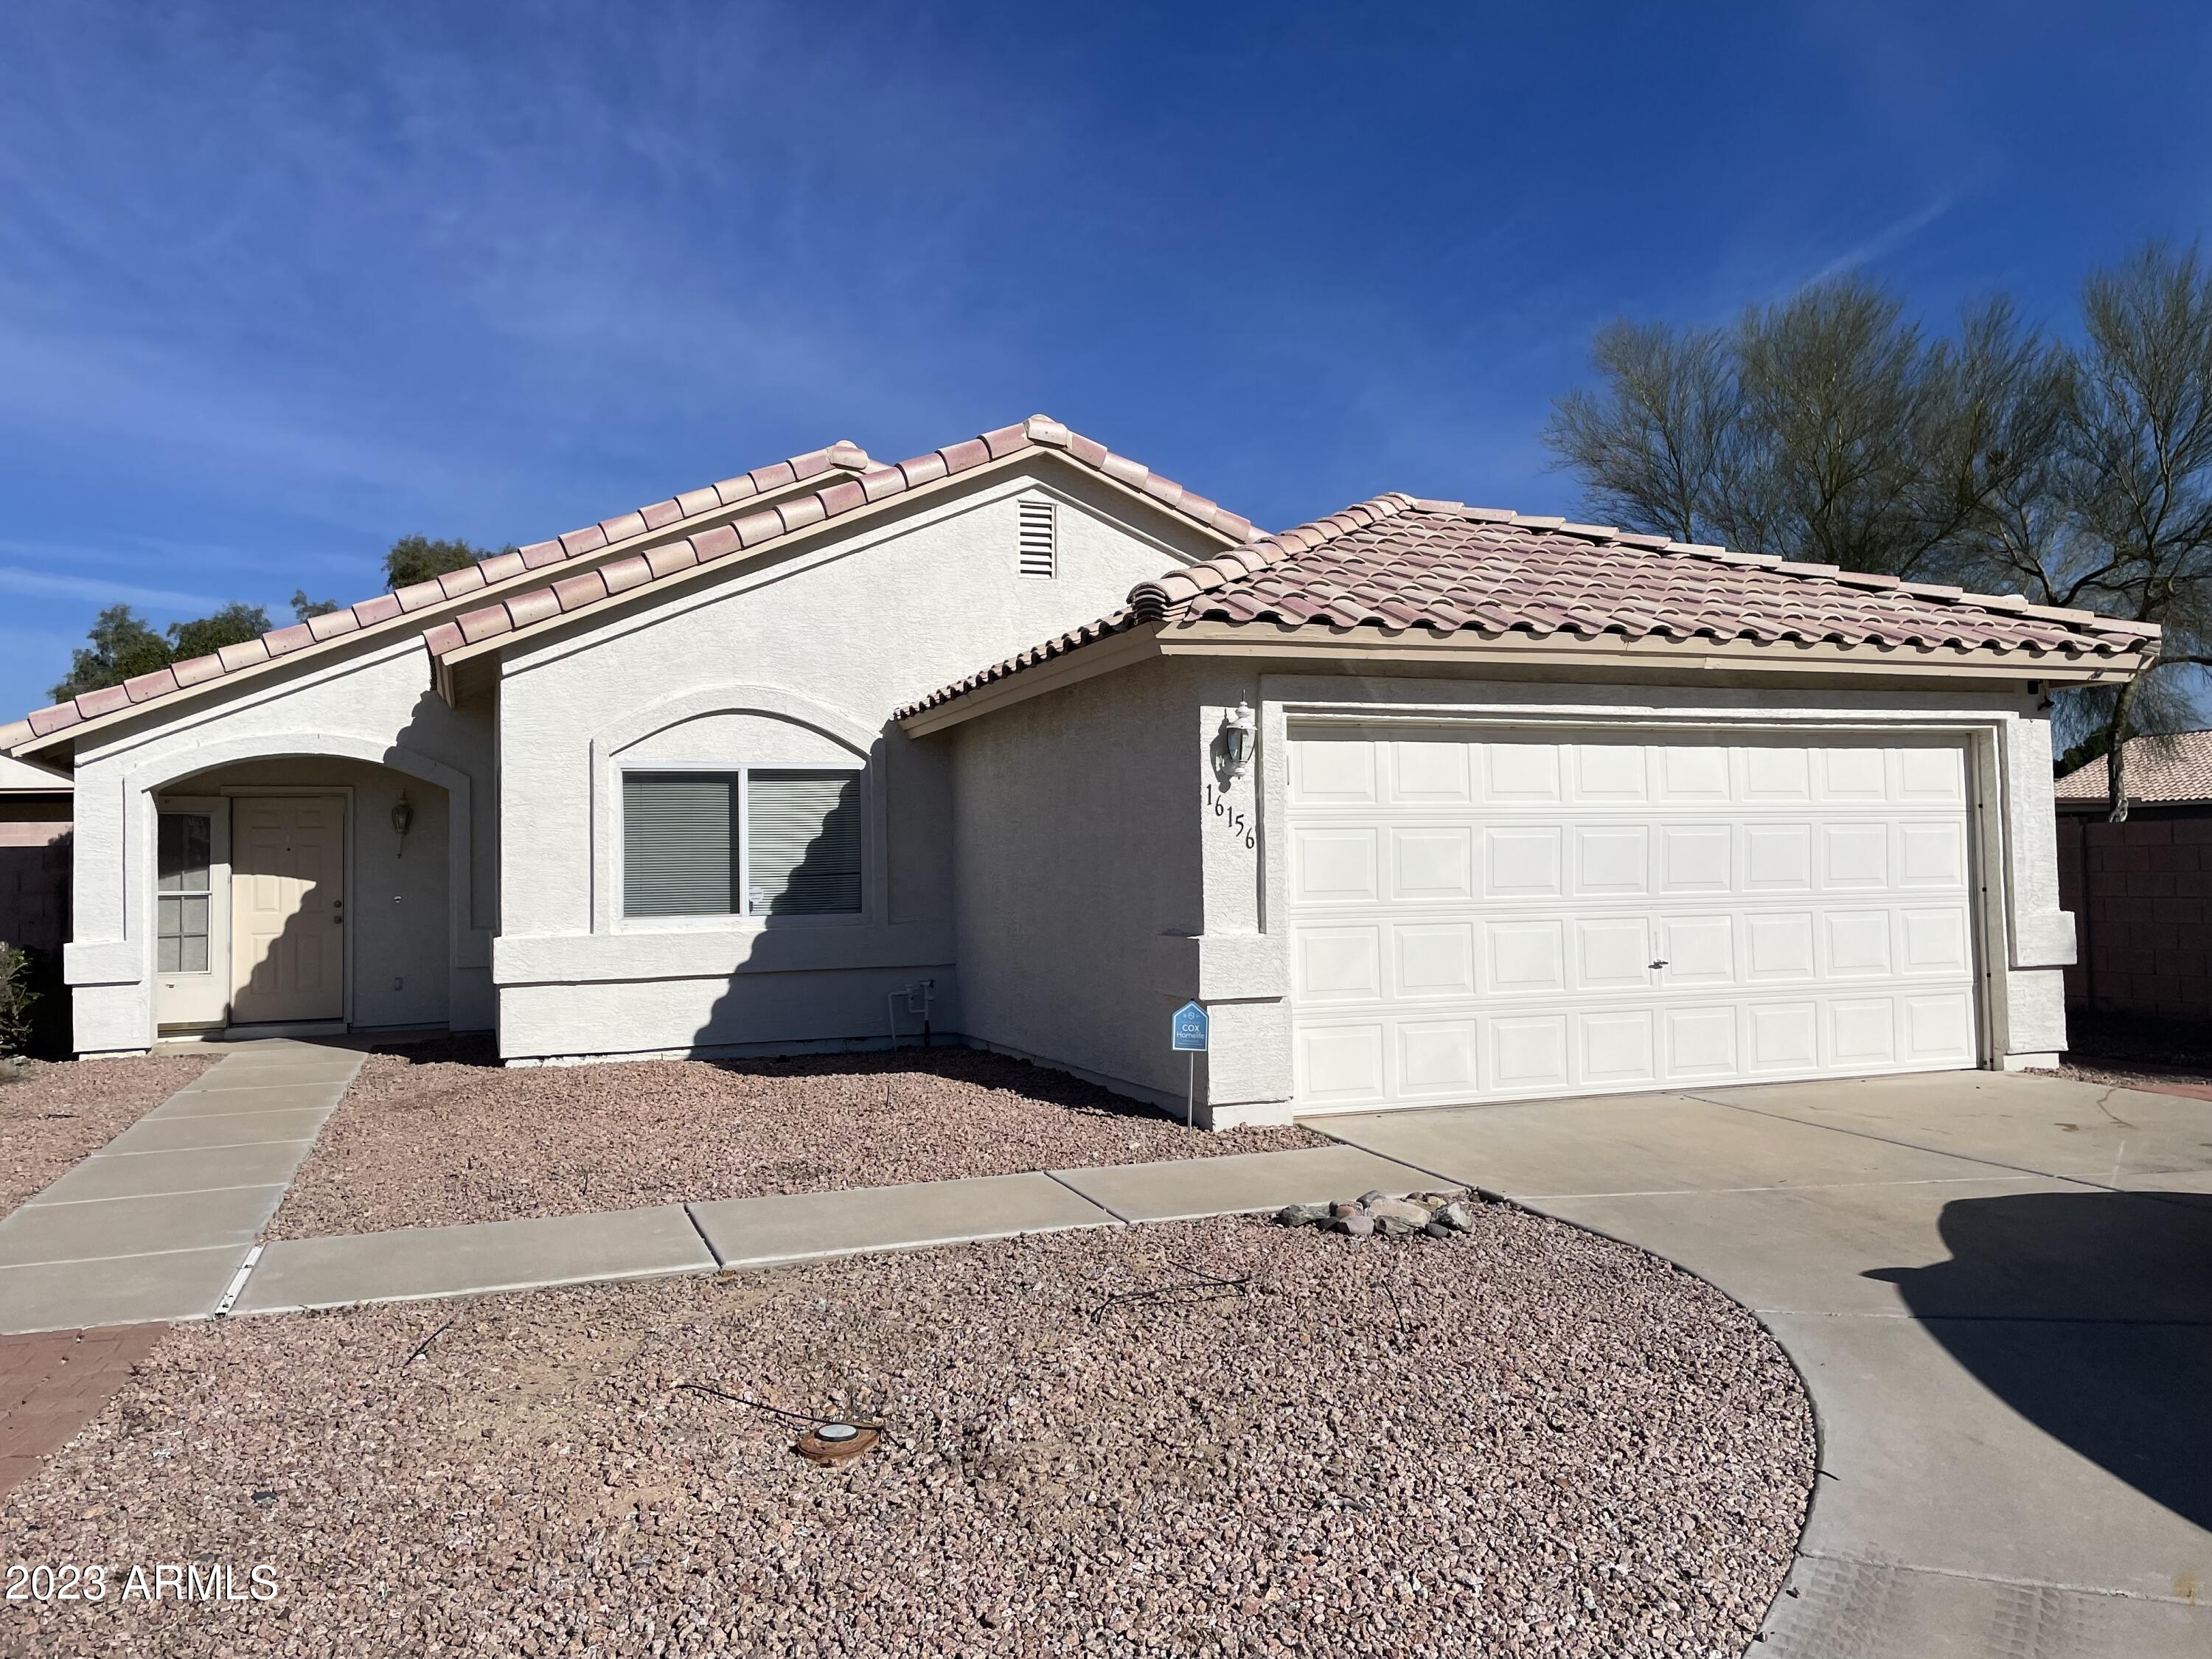 Goodyear, AZ Real Estate Housing Market & Trends | Better Homes and Gardens<sup>®</sup> Real Estate